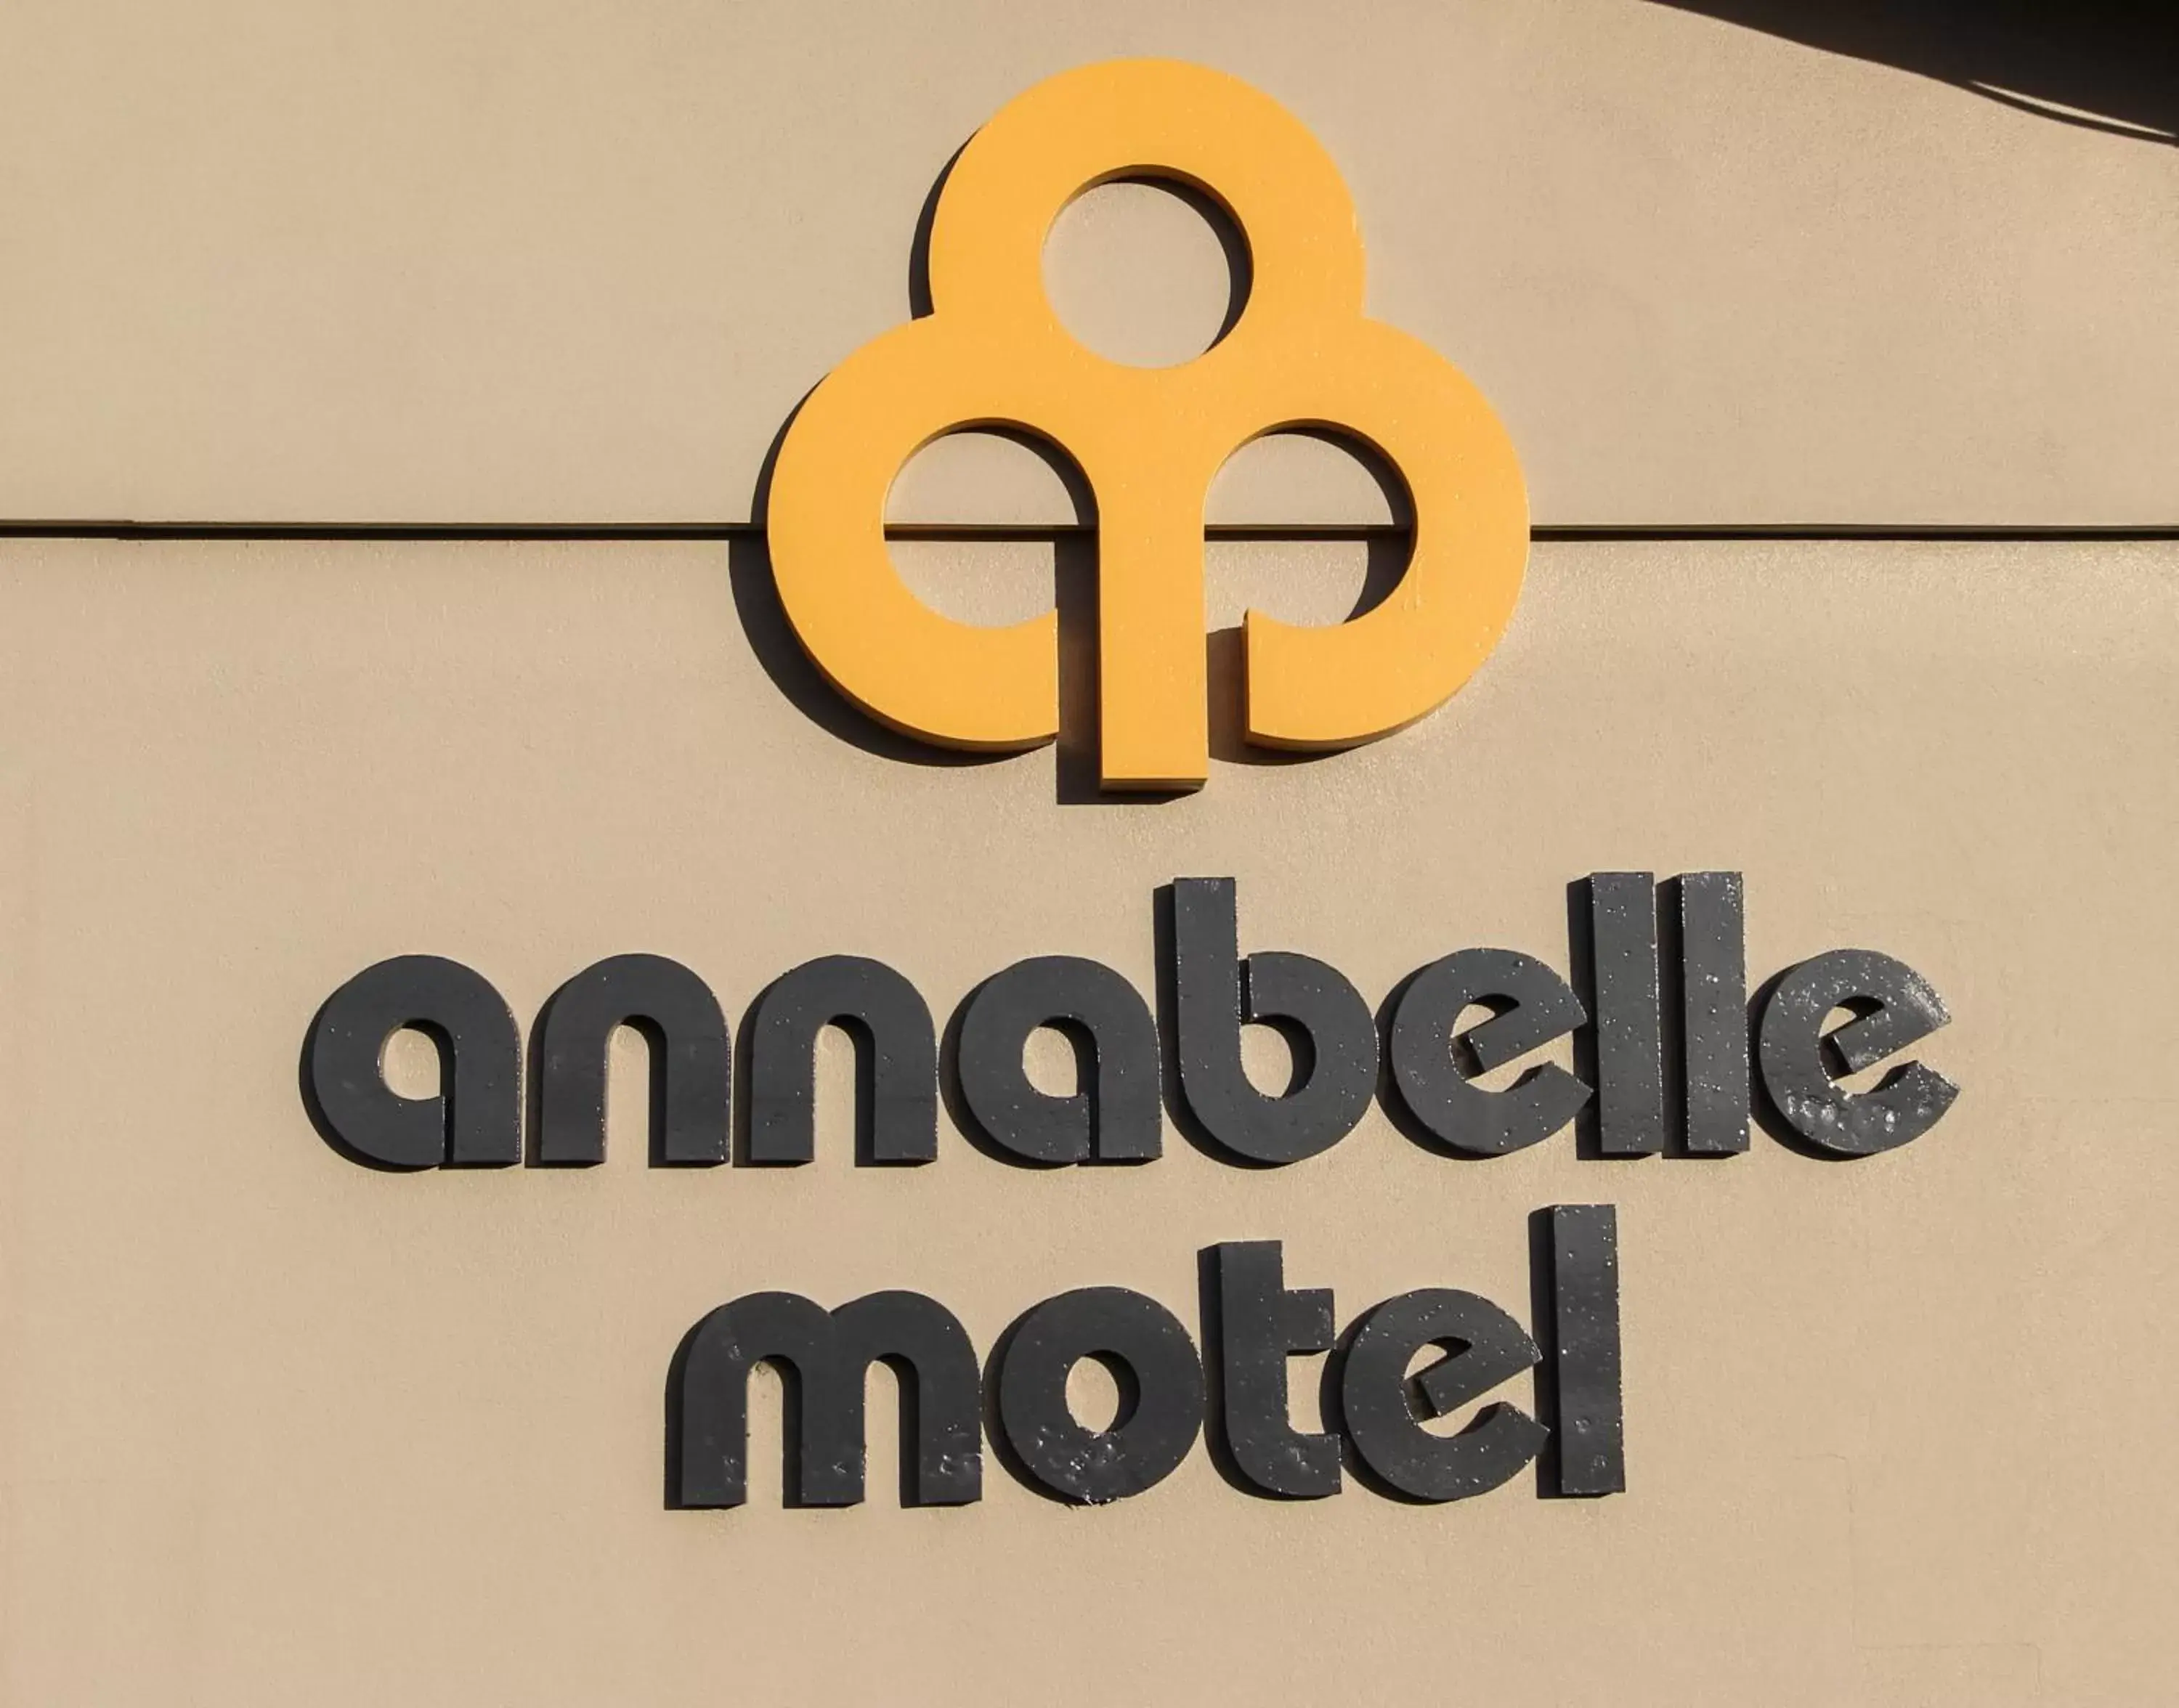 Property logo or sign in Annabelle Motel